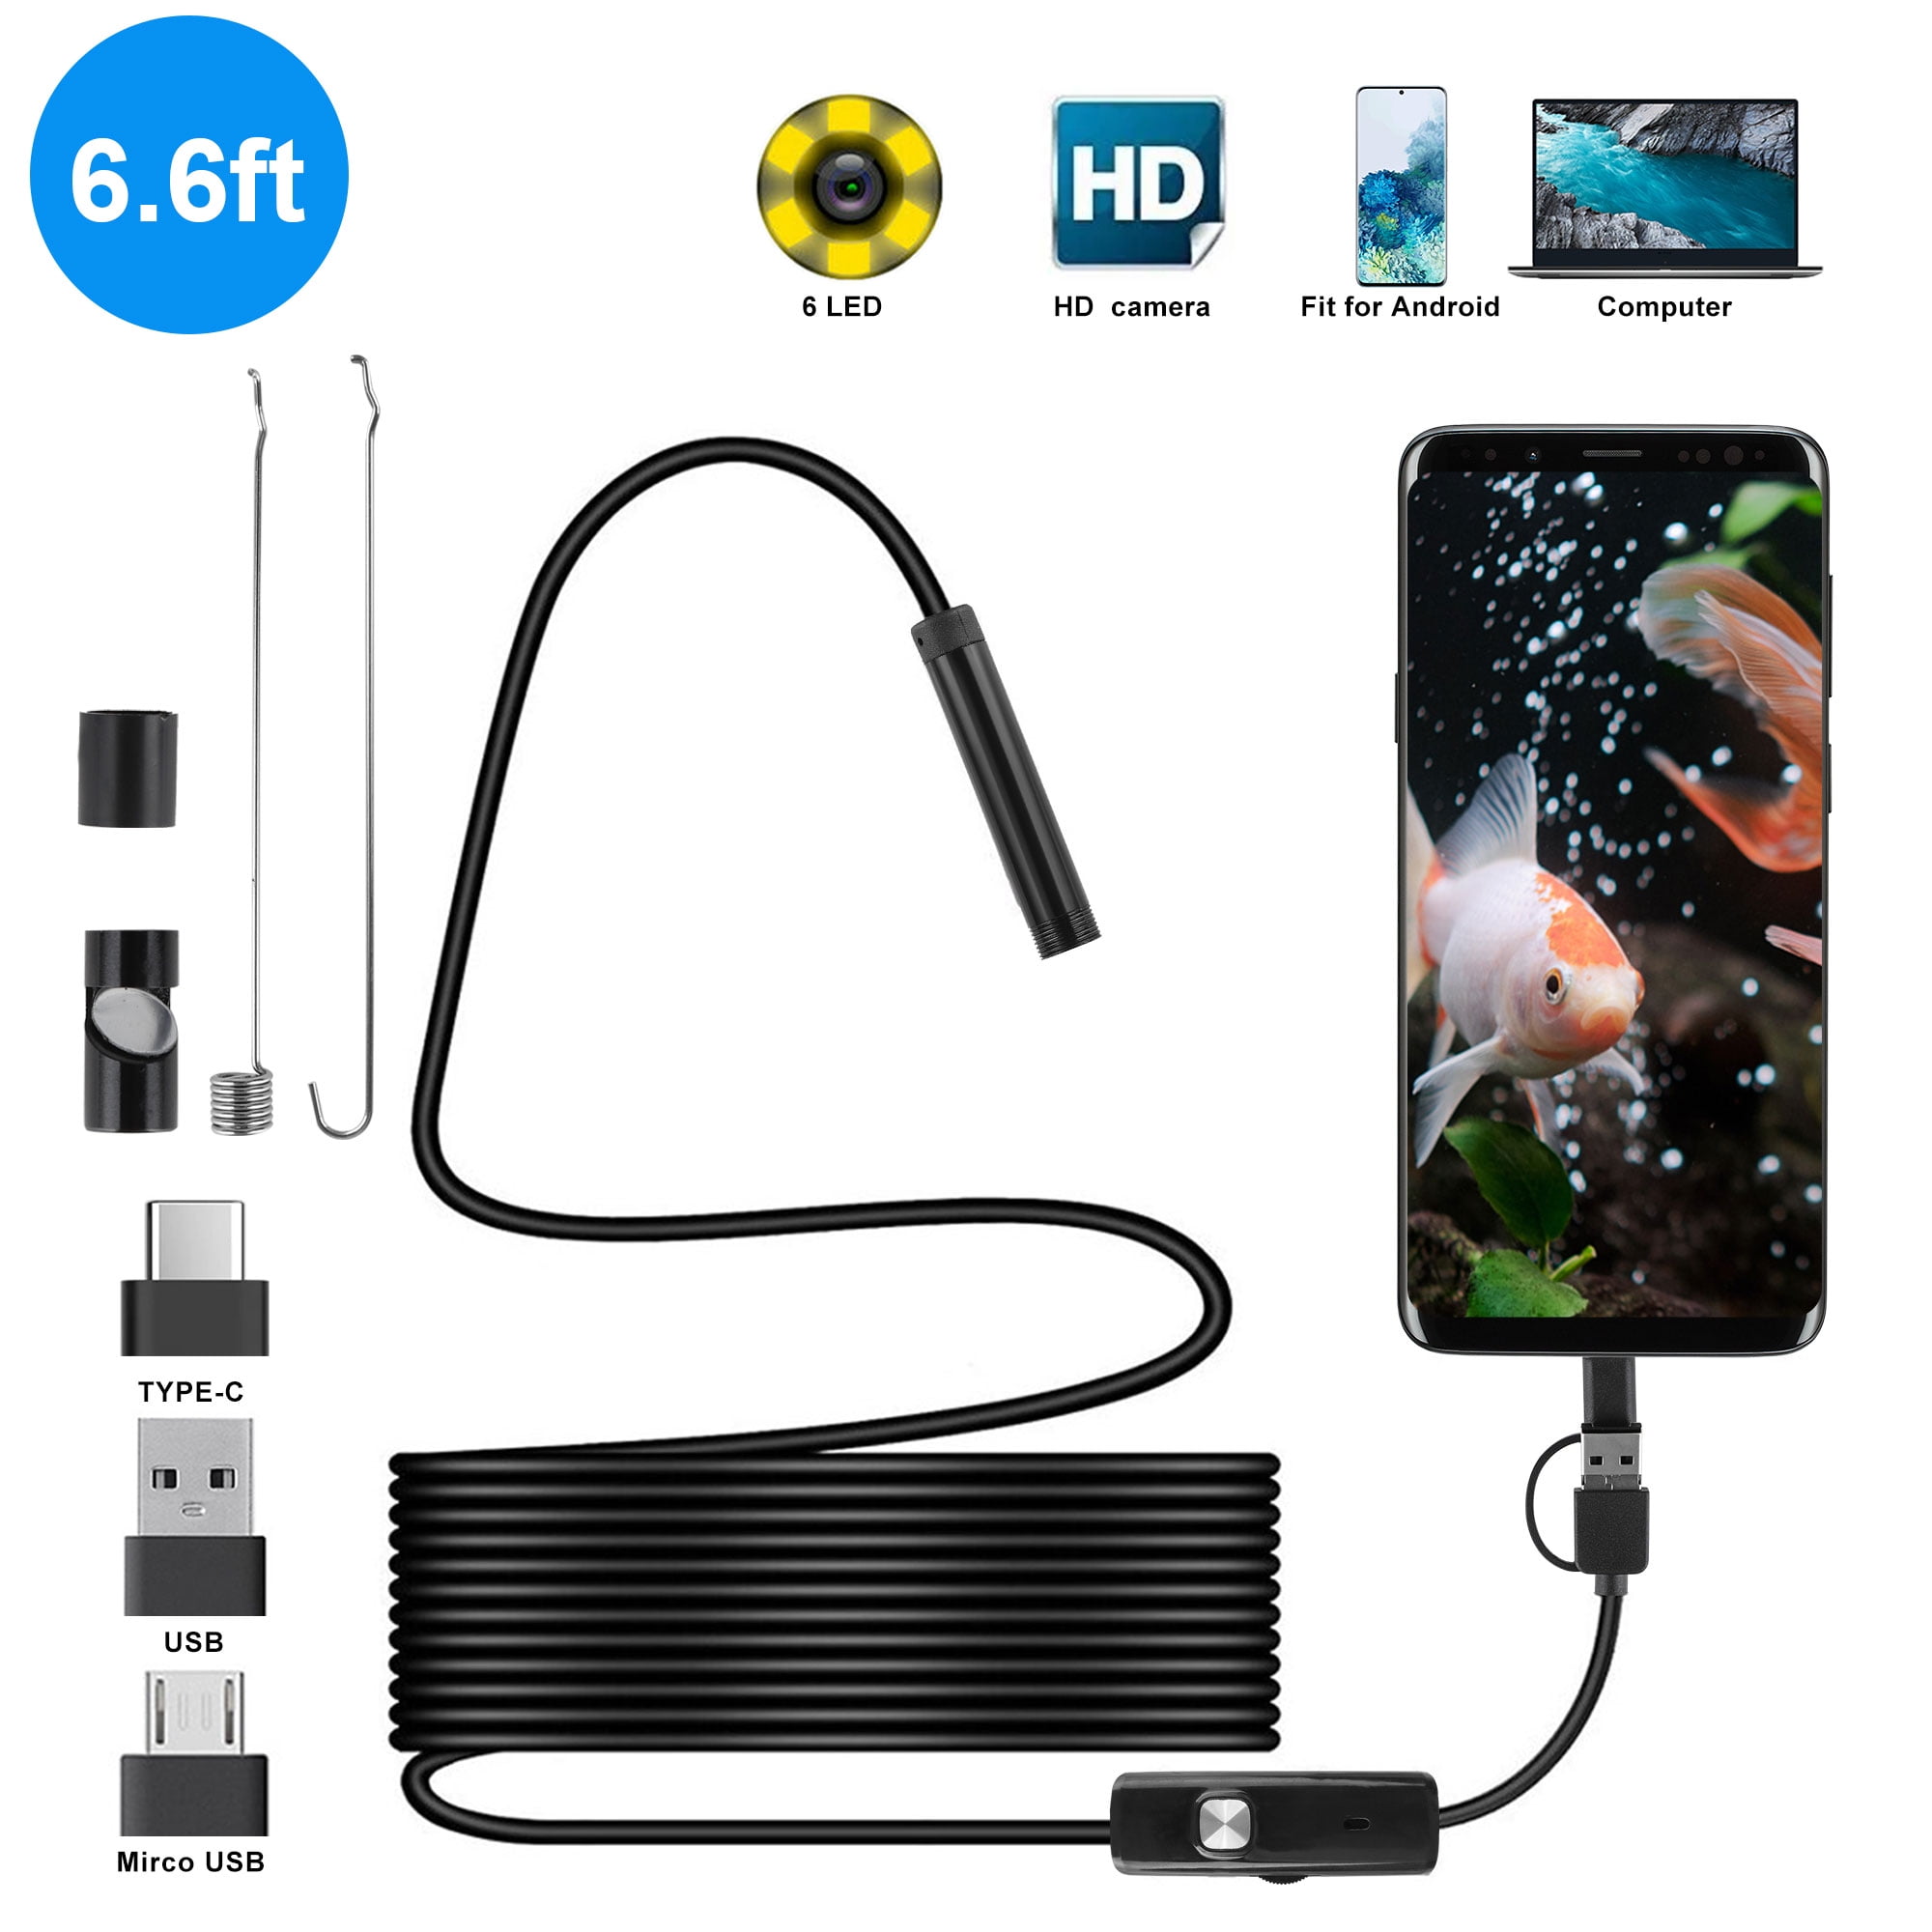 TSV 6.6ft USB Endoscope Compatible with Android System, Waterproof Type-C  Snake Inspection Camera Borescope with 6 LED Lights, Black 